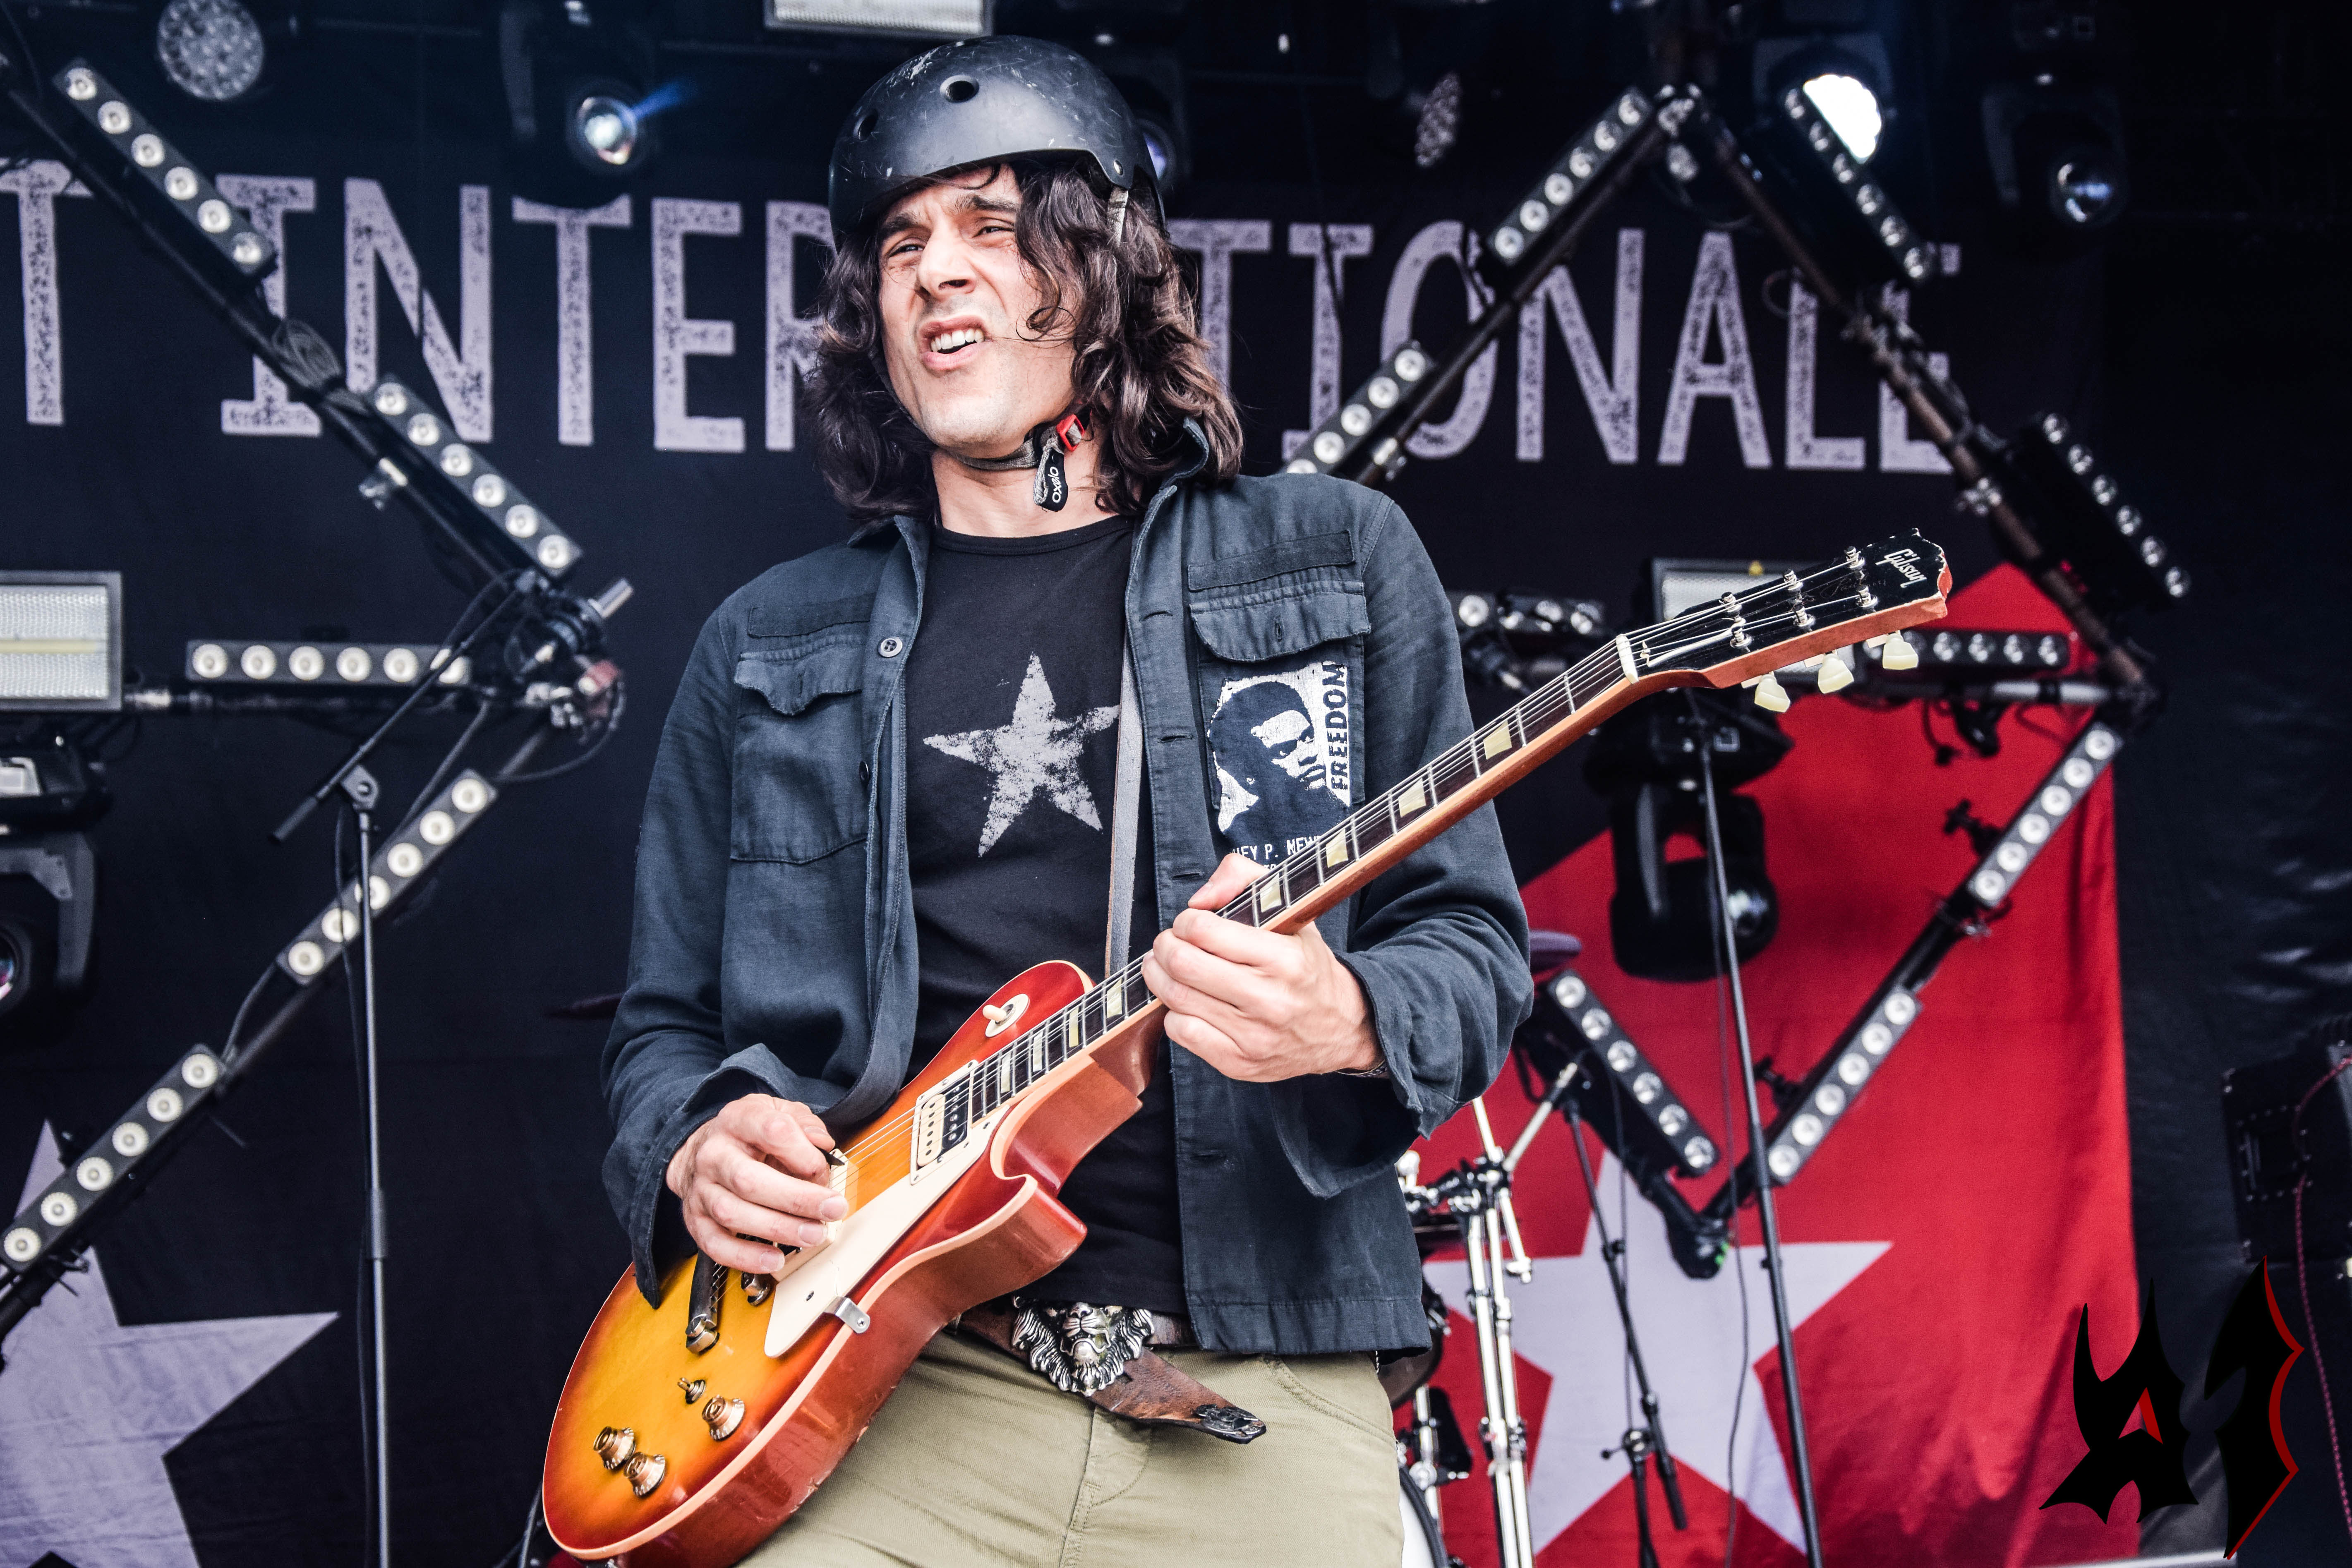 Donwload 2018 – Day 3 - The Last Internationale 22